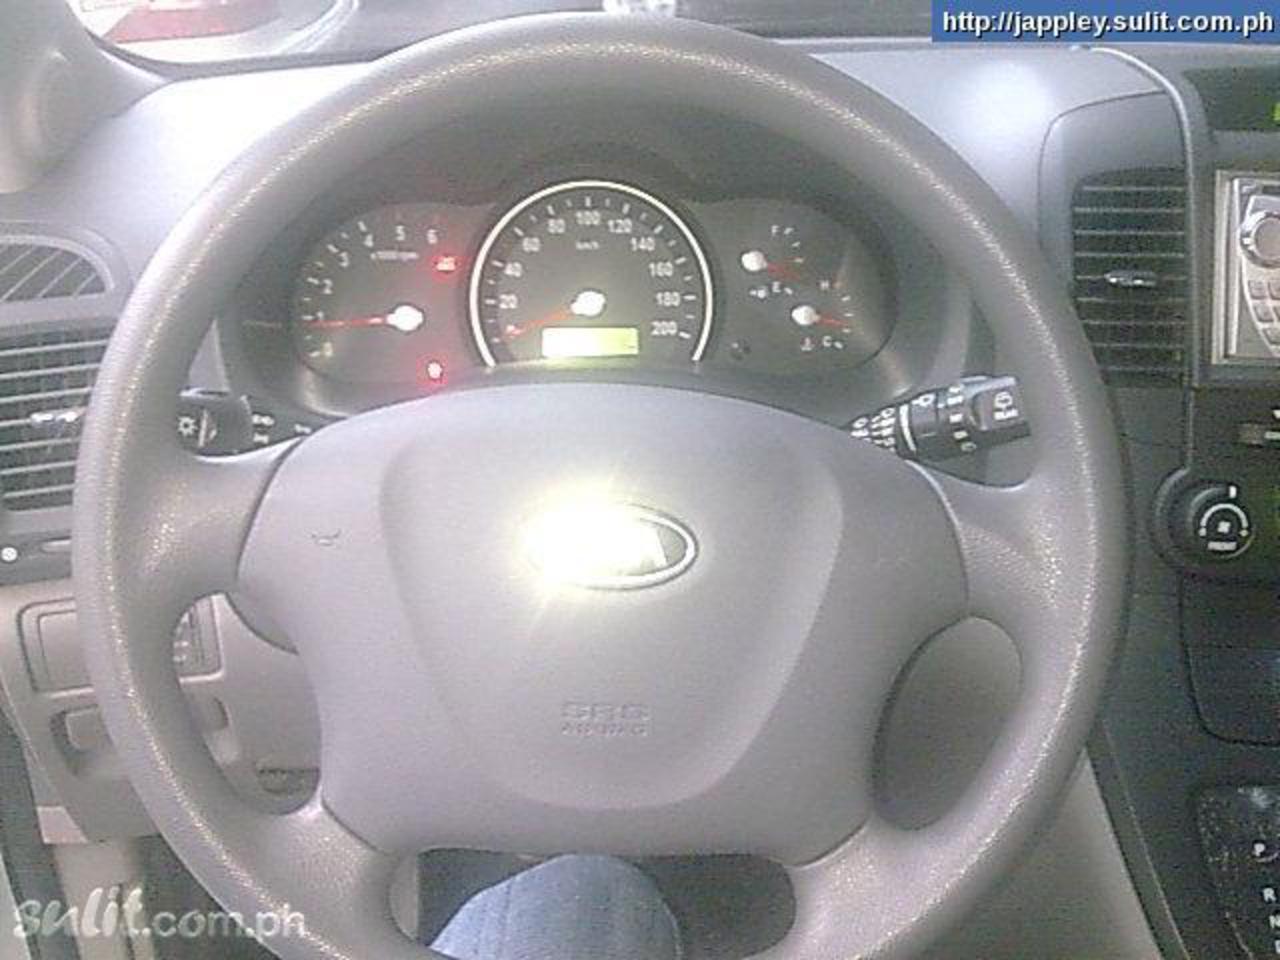 Kia Grand Carnival LX 29 CRDi Photo Gallery: Photo #12 out of 8 ...